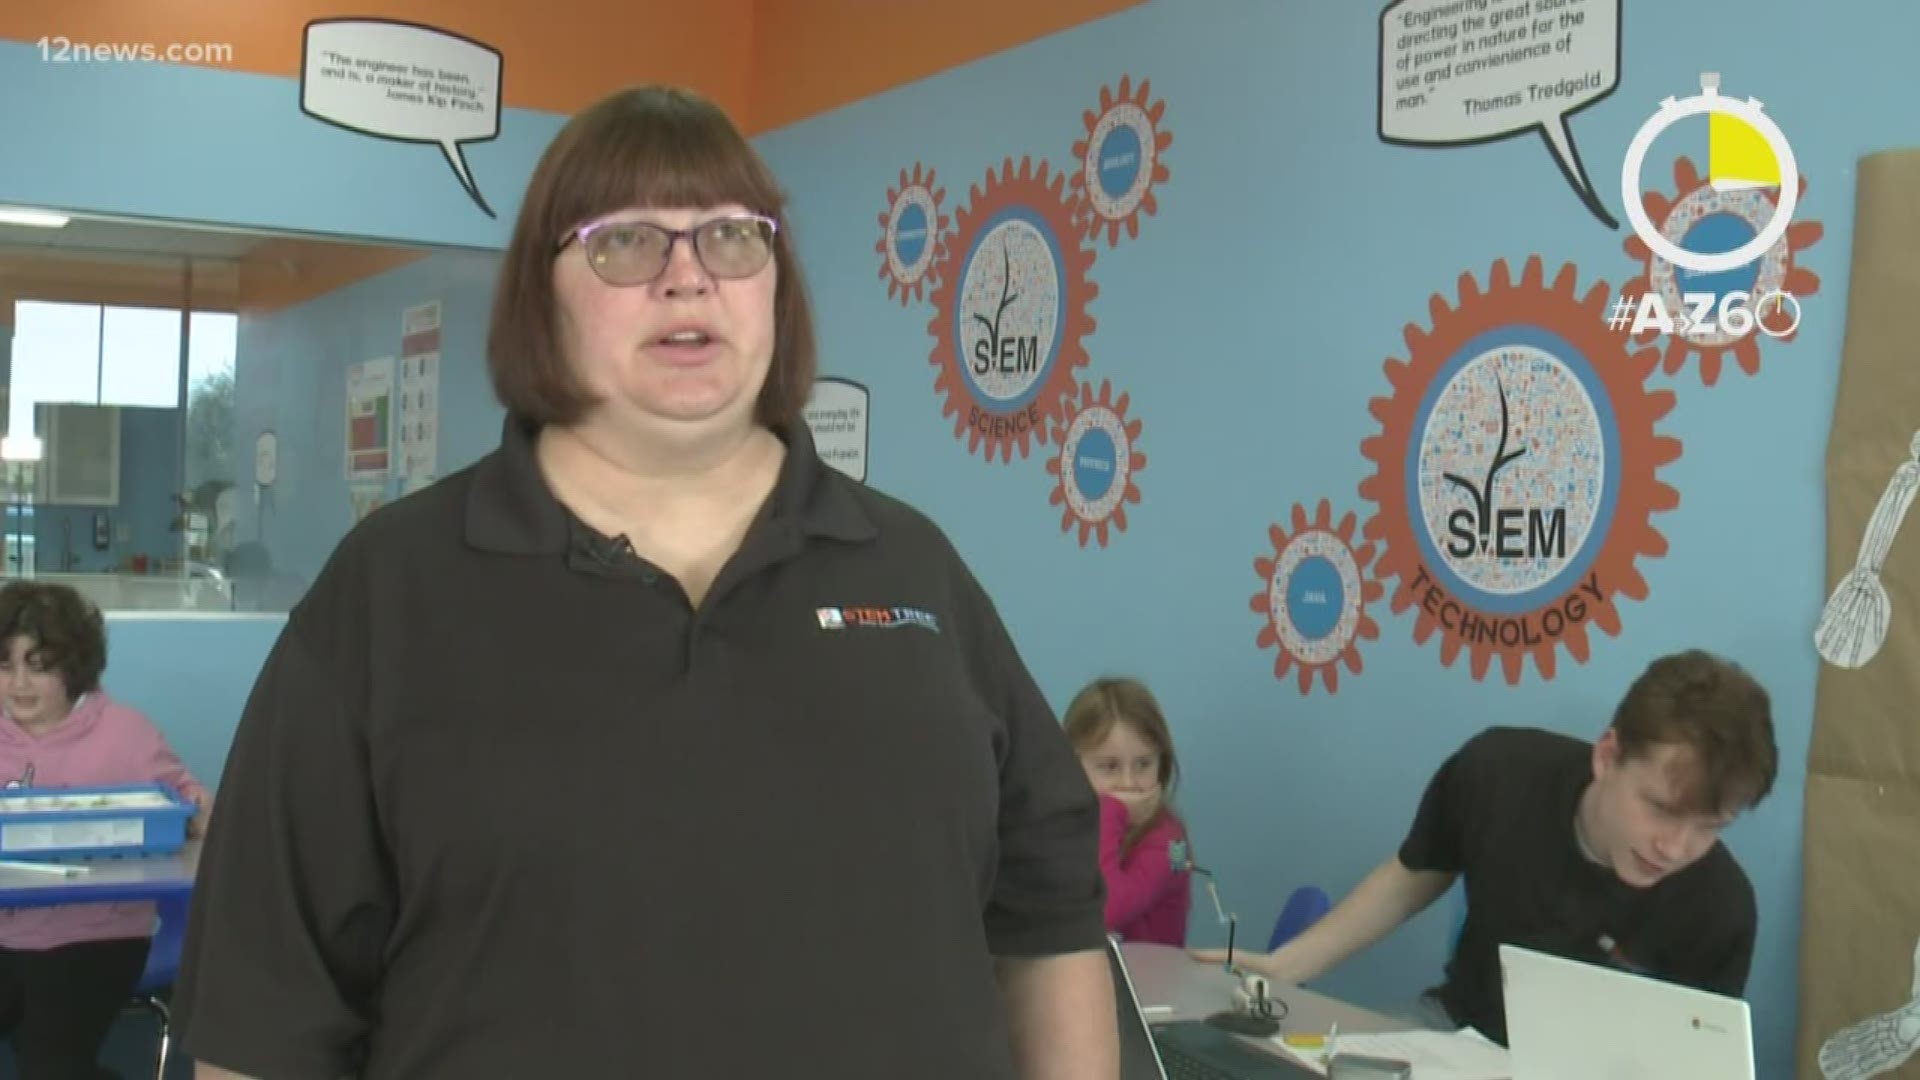 Kids across the Valley can learn about STEM topics at Stemtree. Trisha Hendricks has the story.